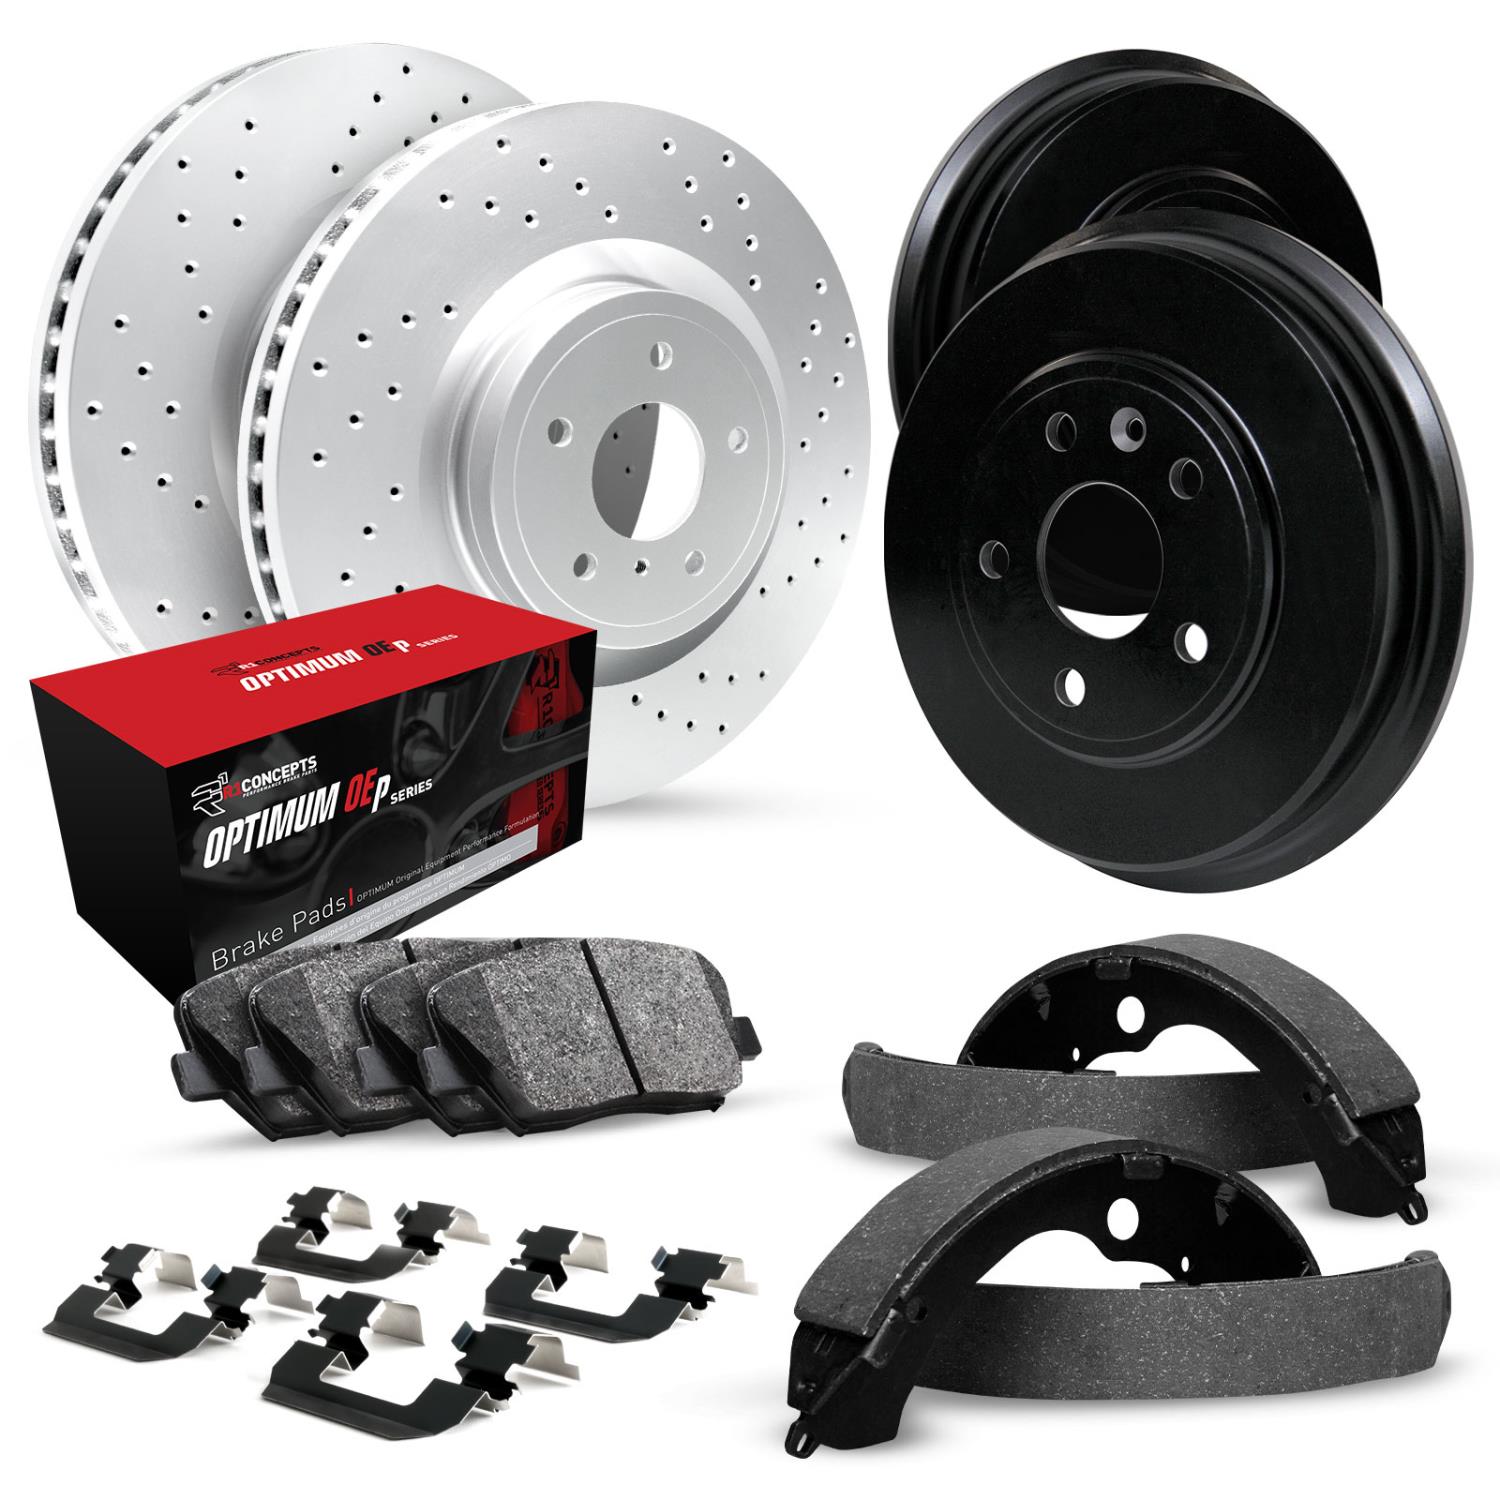 GEO-Carbon Drilled Brake Rotor & Drum Set w/Optimum OE Pads, Shoes, & Hardware, 1991-1994 GM, Position: Front & Rear